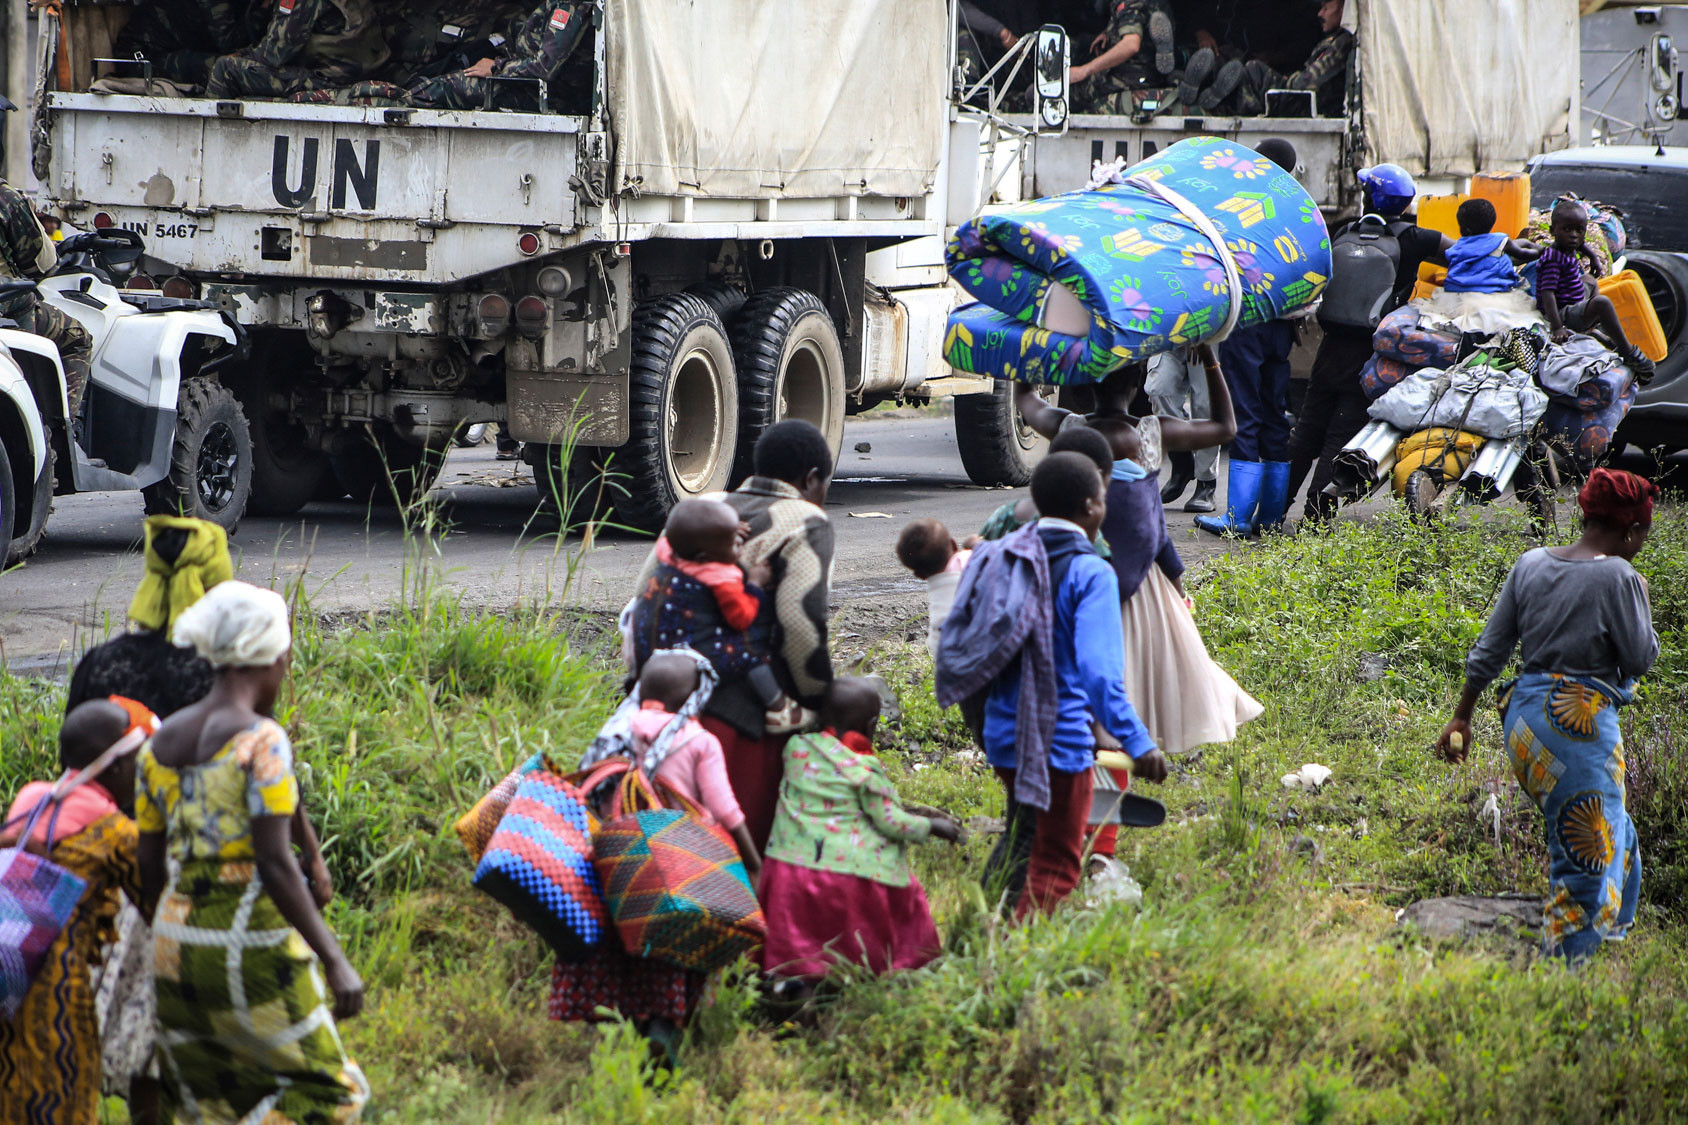 Goma, North Kivu, May 27  2021. People flee Goma towards the town of Sake five days after the eruption following an order from the government to evacuate the city for fear of another eruption. © Ley Uwera for Fondation Carmignac 